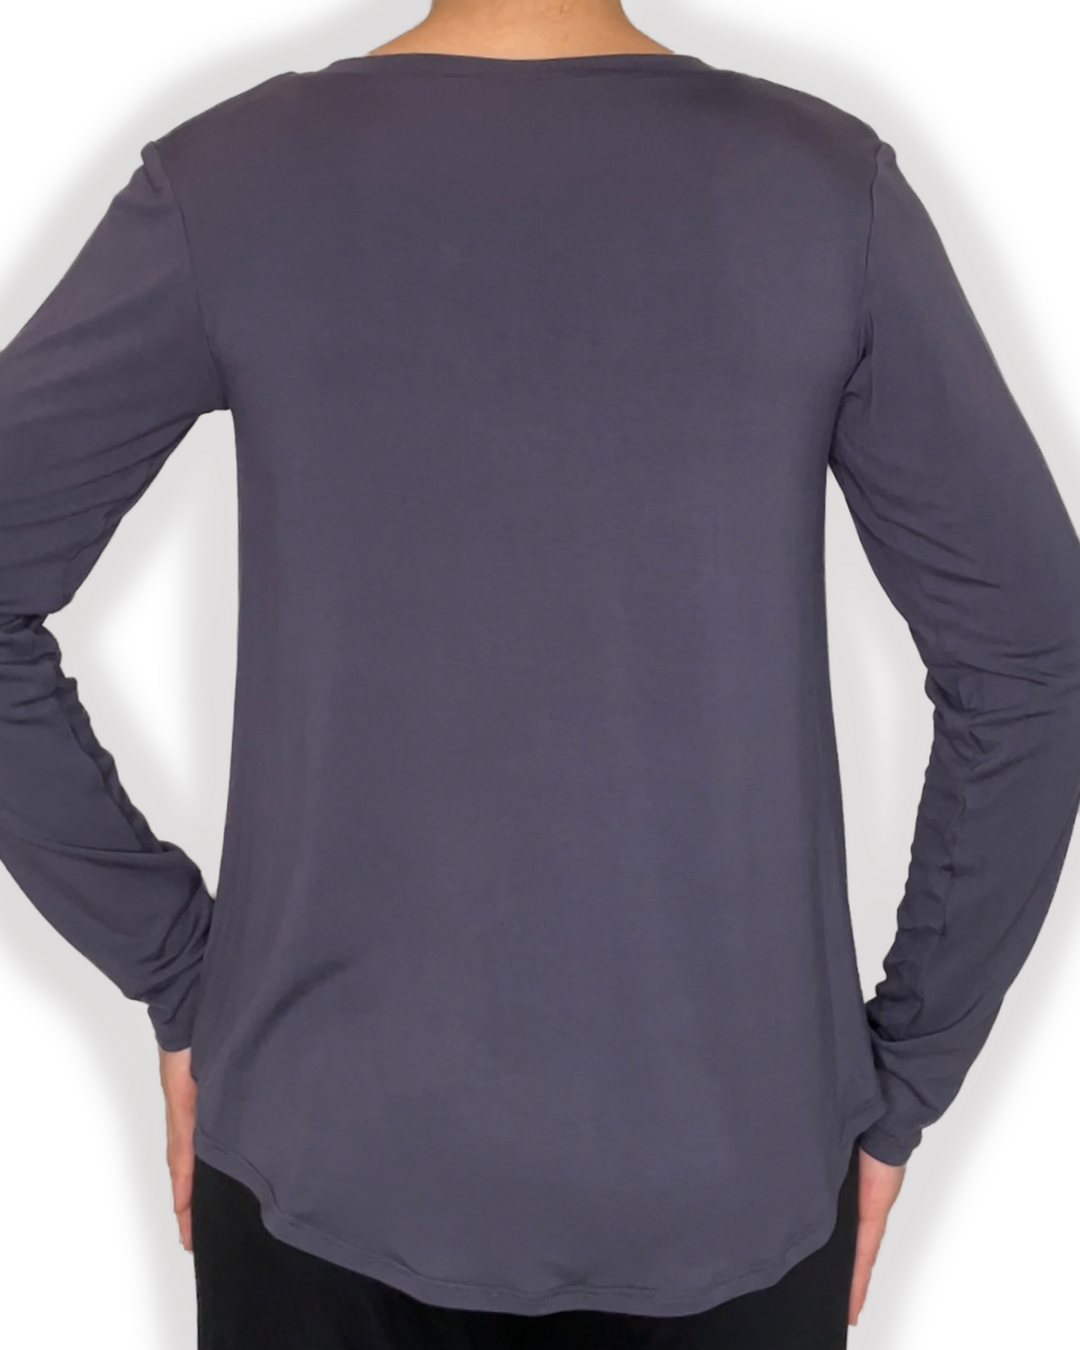 Darci Women's Bamboo Long Sleeve Top in dusty blur color back view